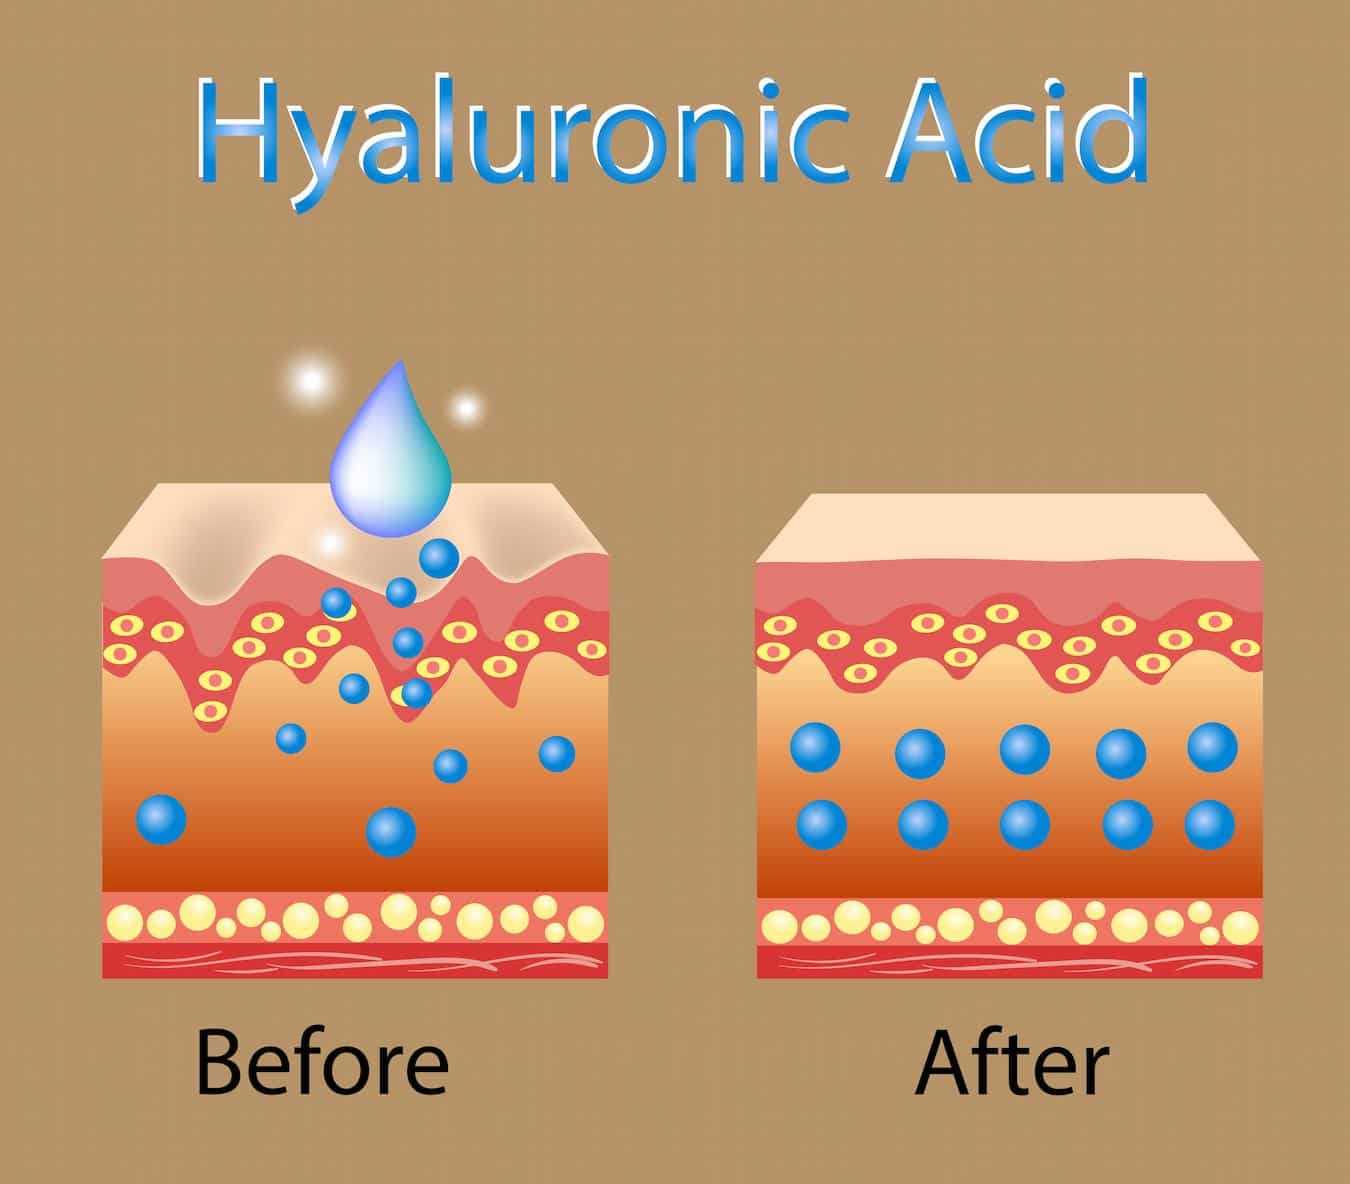 Hyaluronic acid helps with skin cell turnover and is a hydrating skincare ingredient